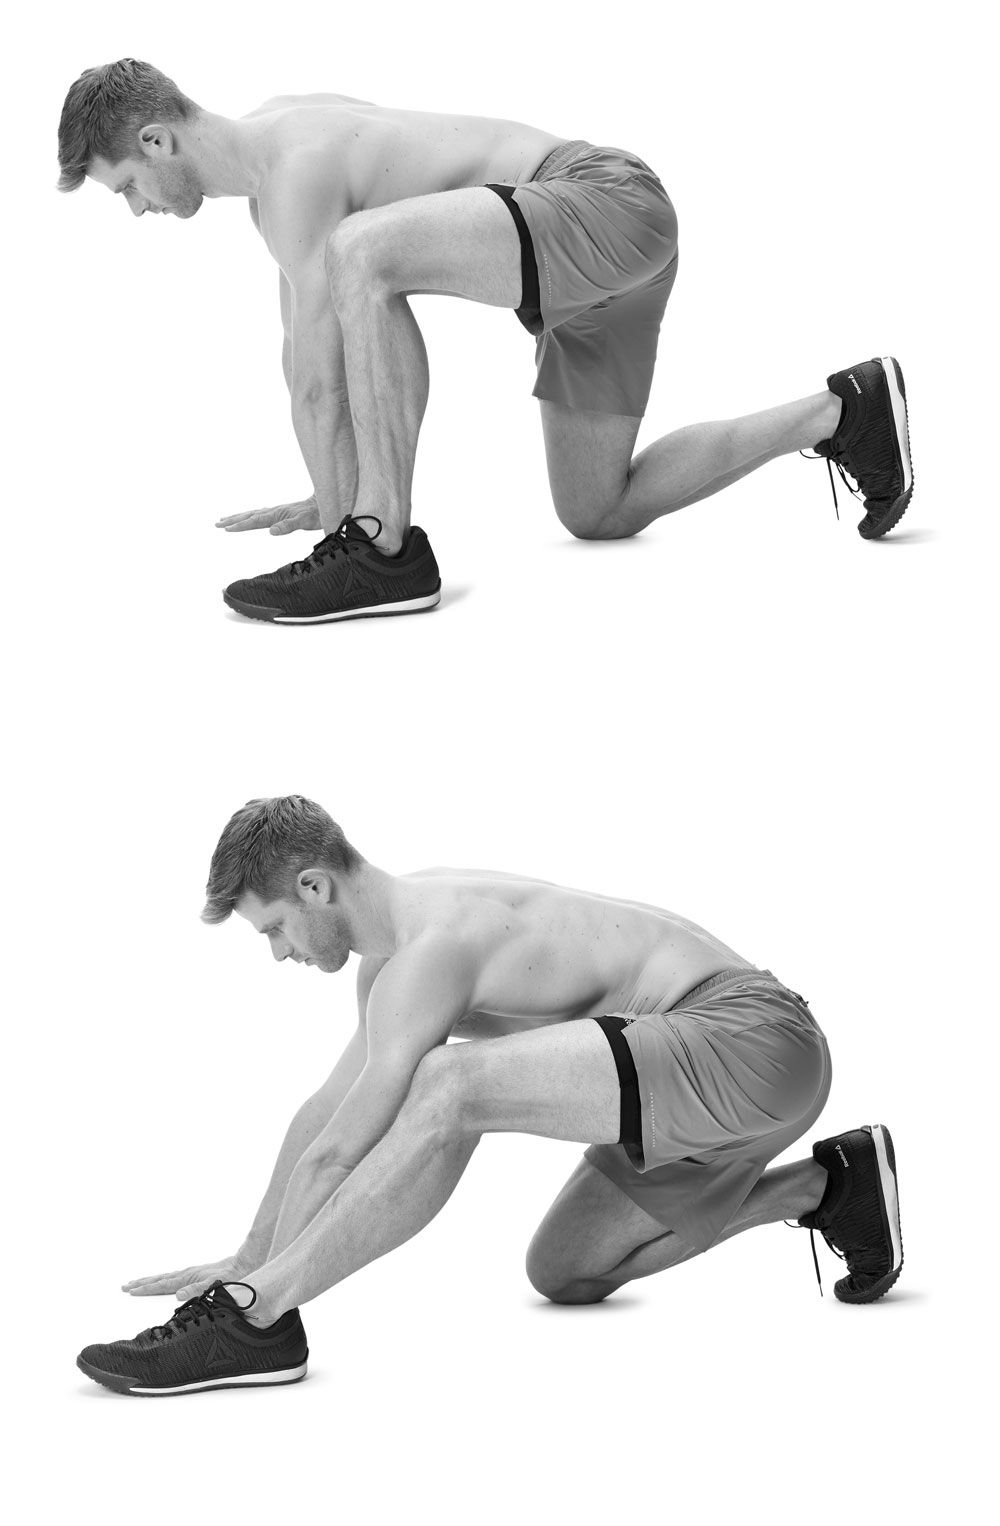 5 Best Cooldown Exercises - Best Stretches for After Workouts